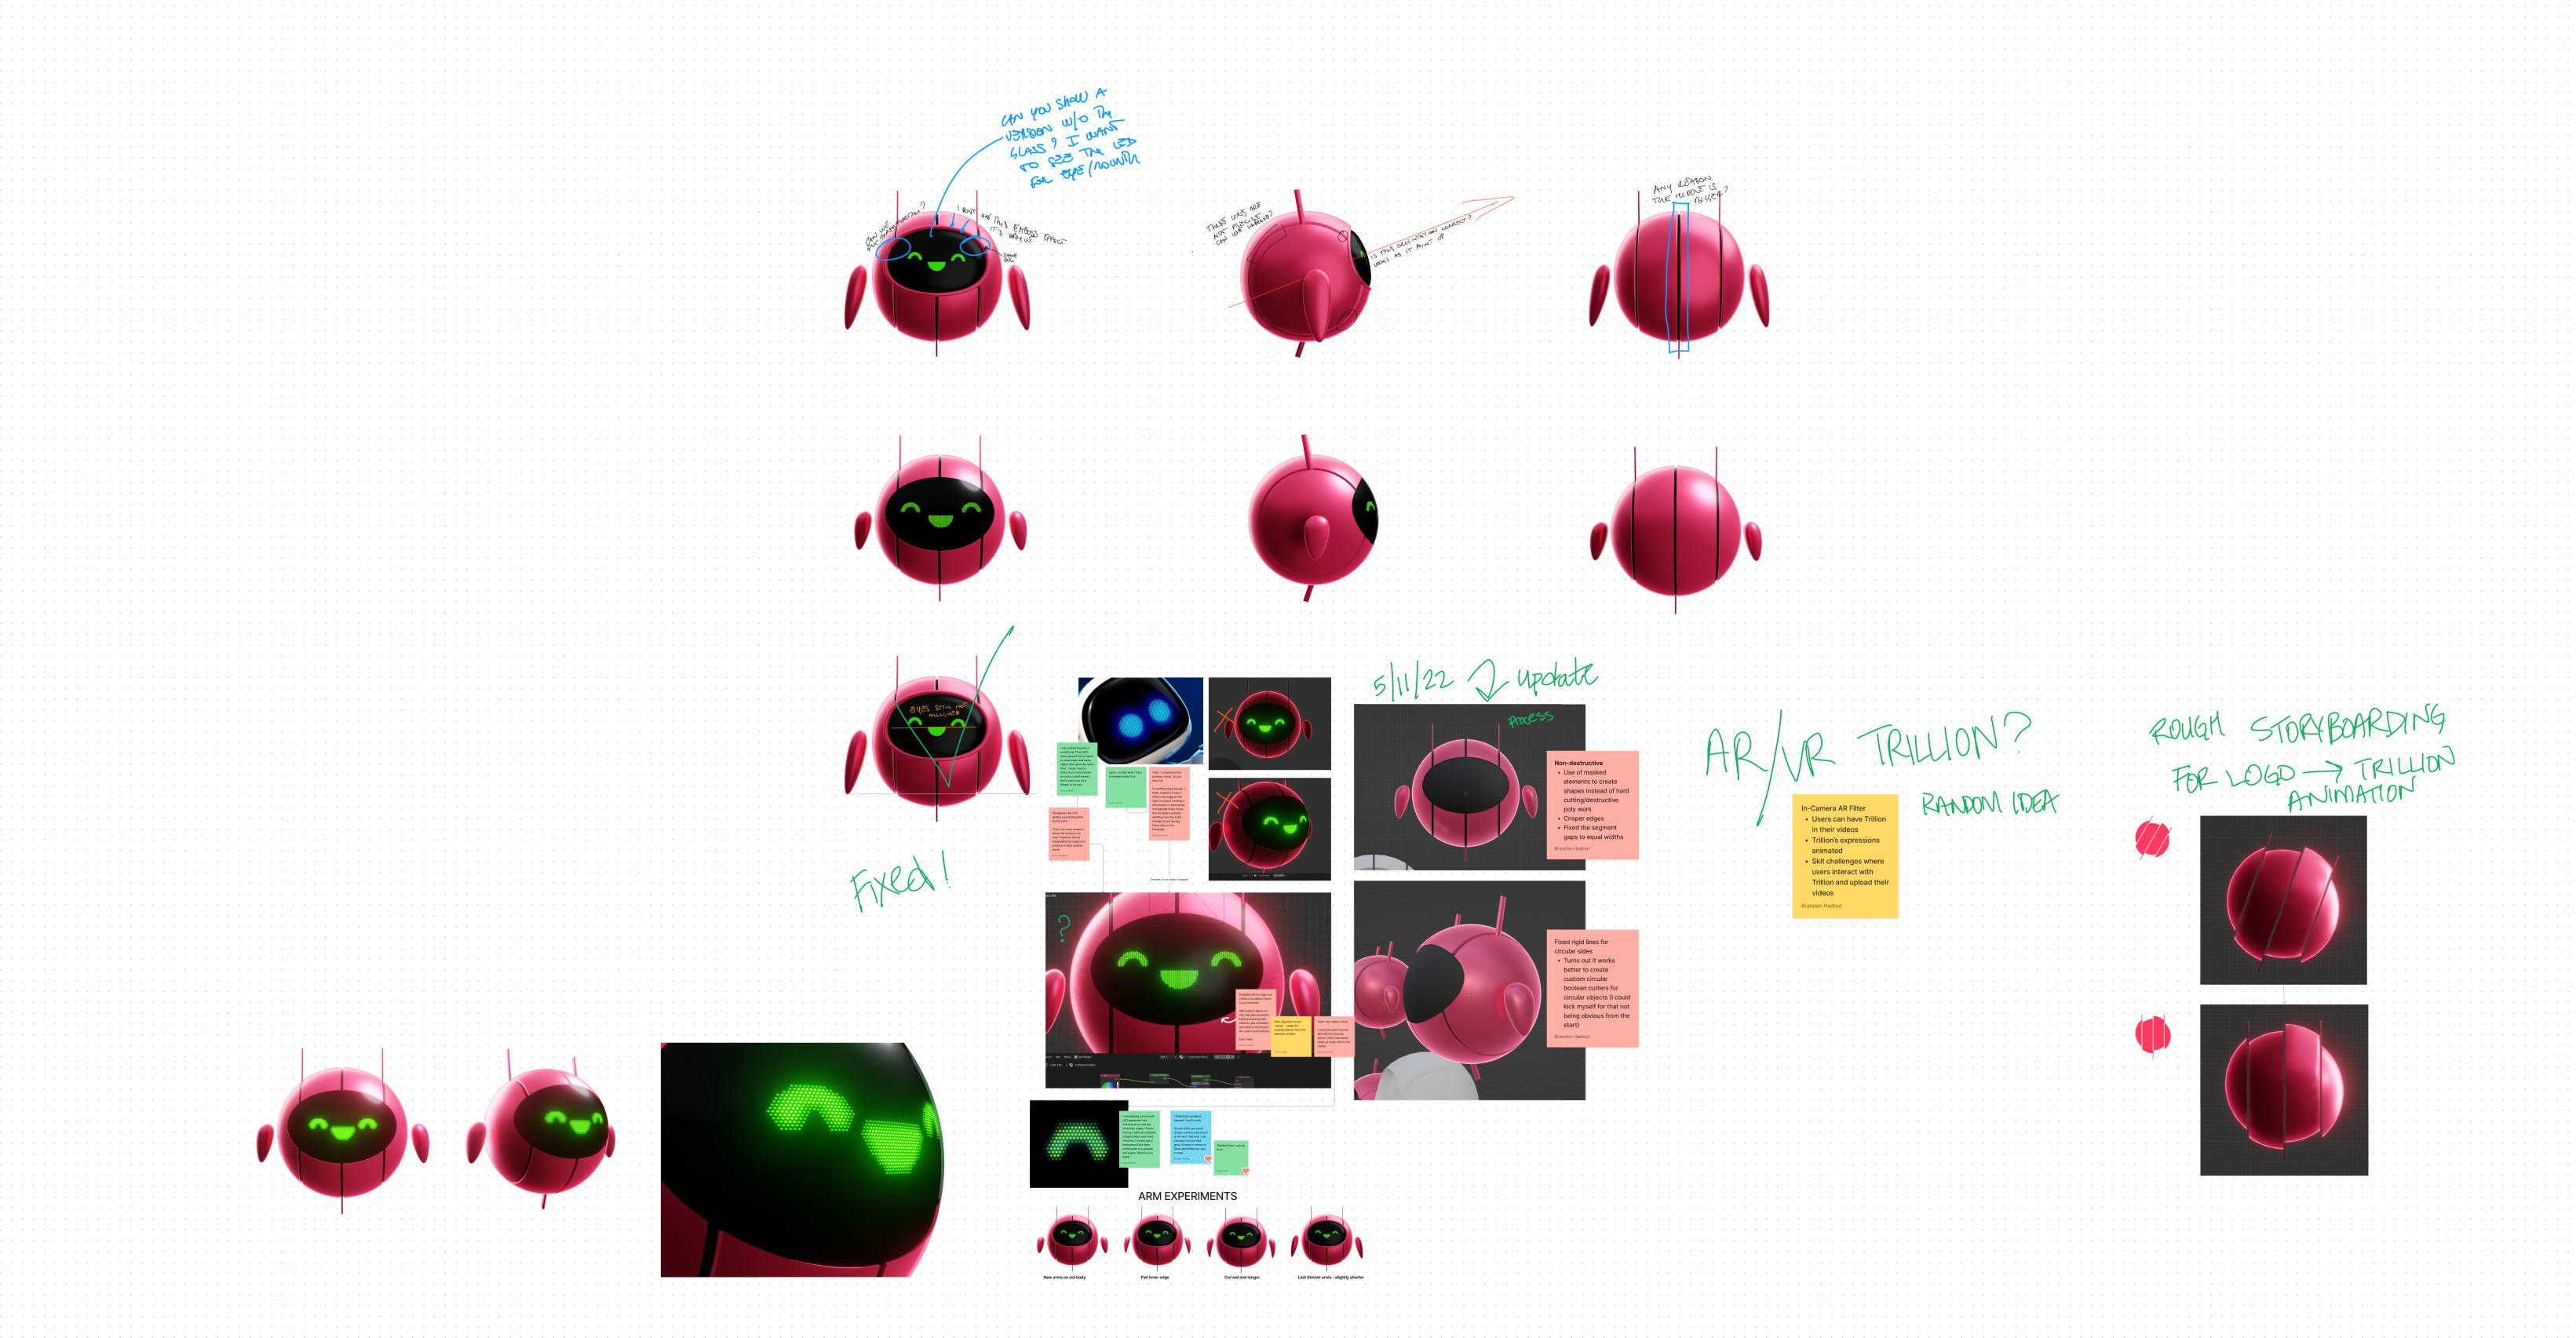 Image of brainstorming and critique FigJam for a cute, pink, smiling robot with two antennae named Trillion.